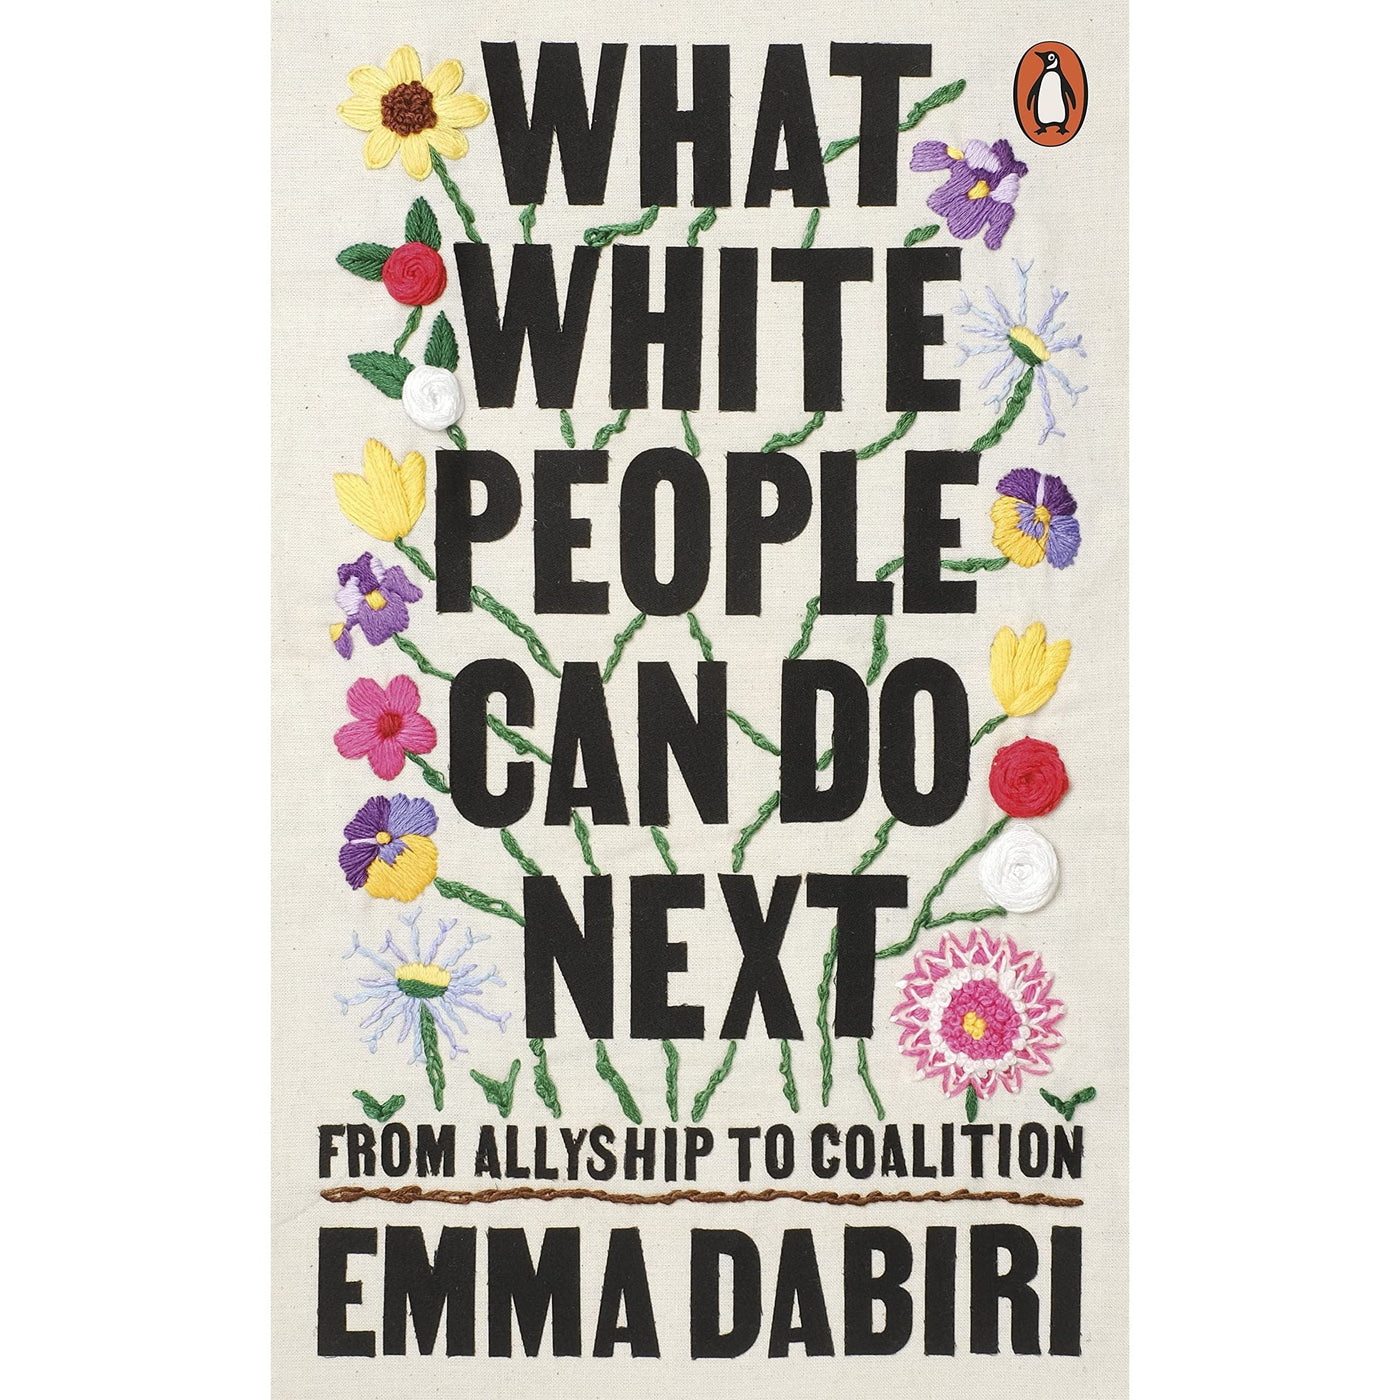 Emma Dabari: What White People Can Do Next